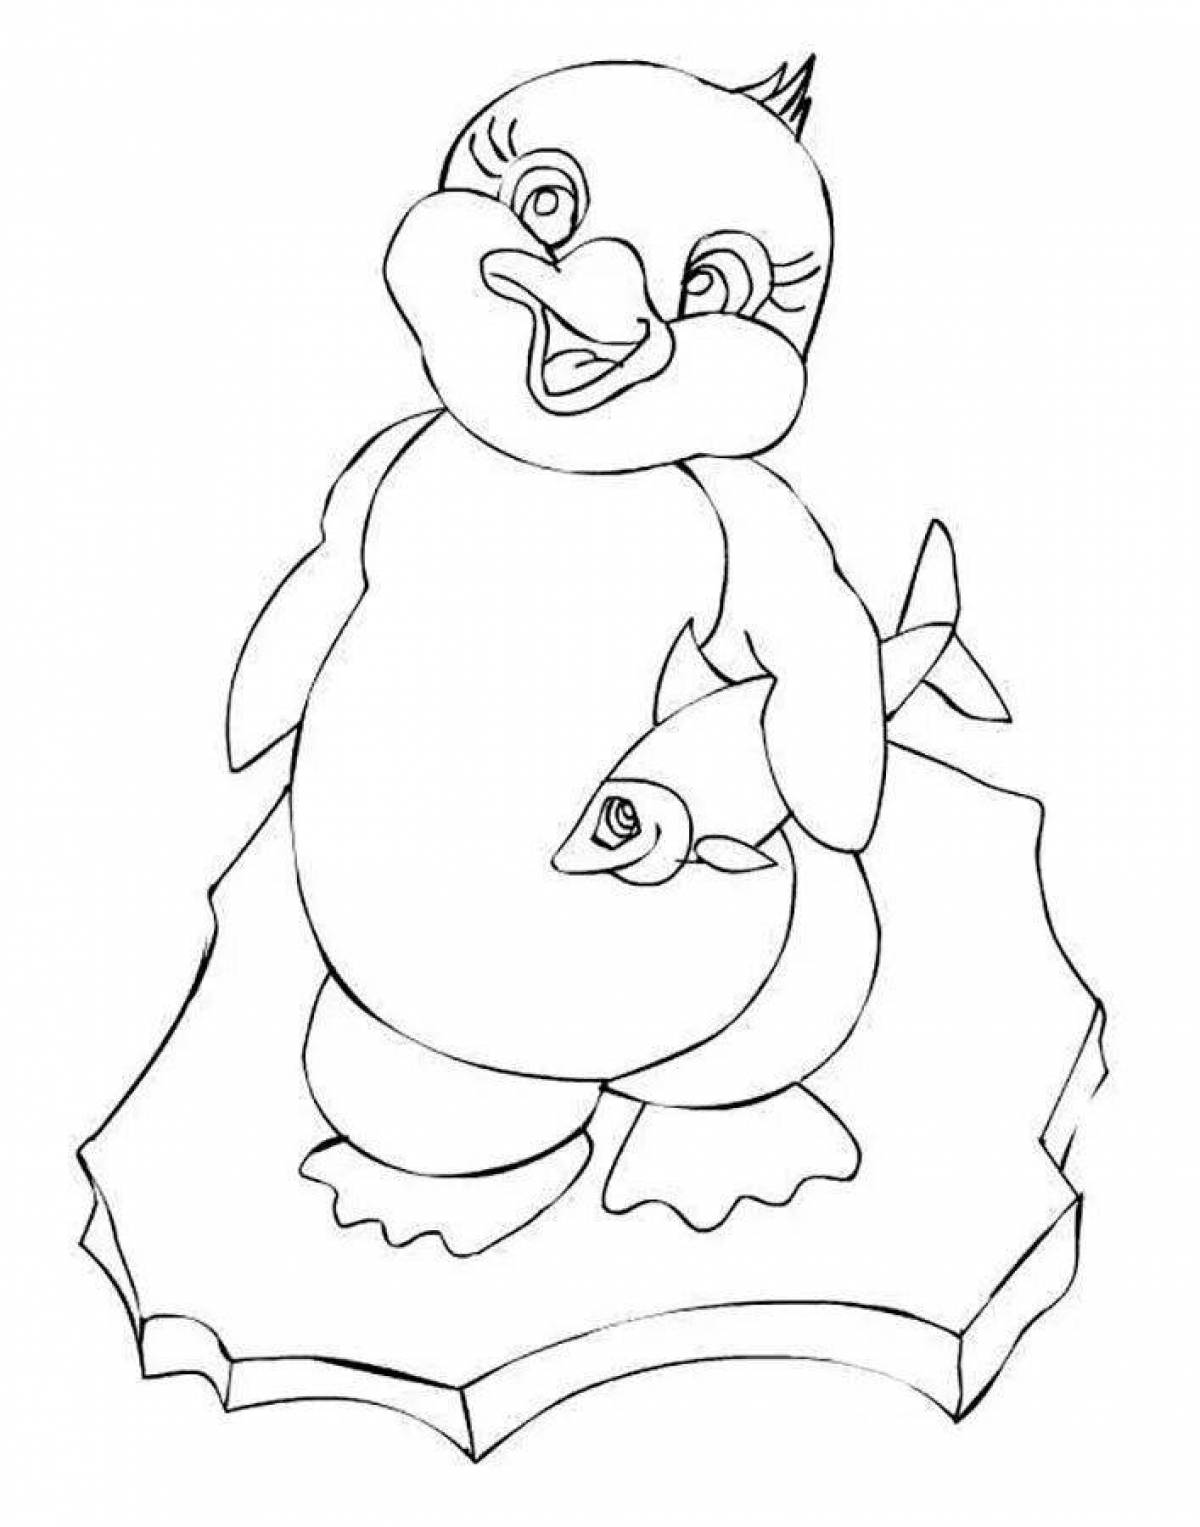 Coloring page gorgeous penguin on ice